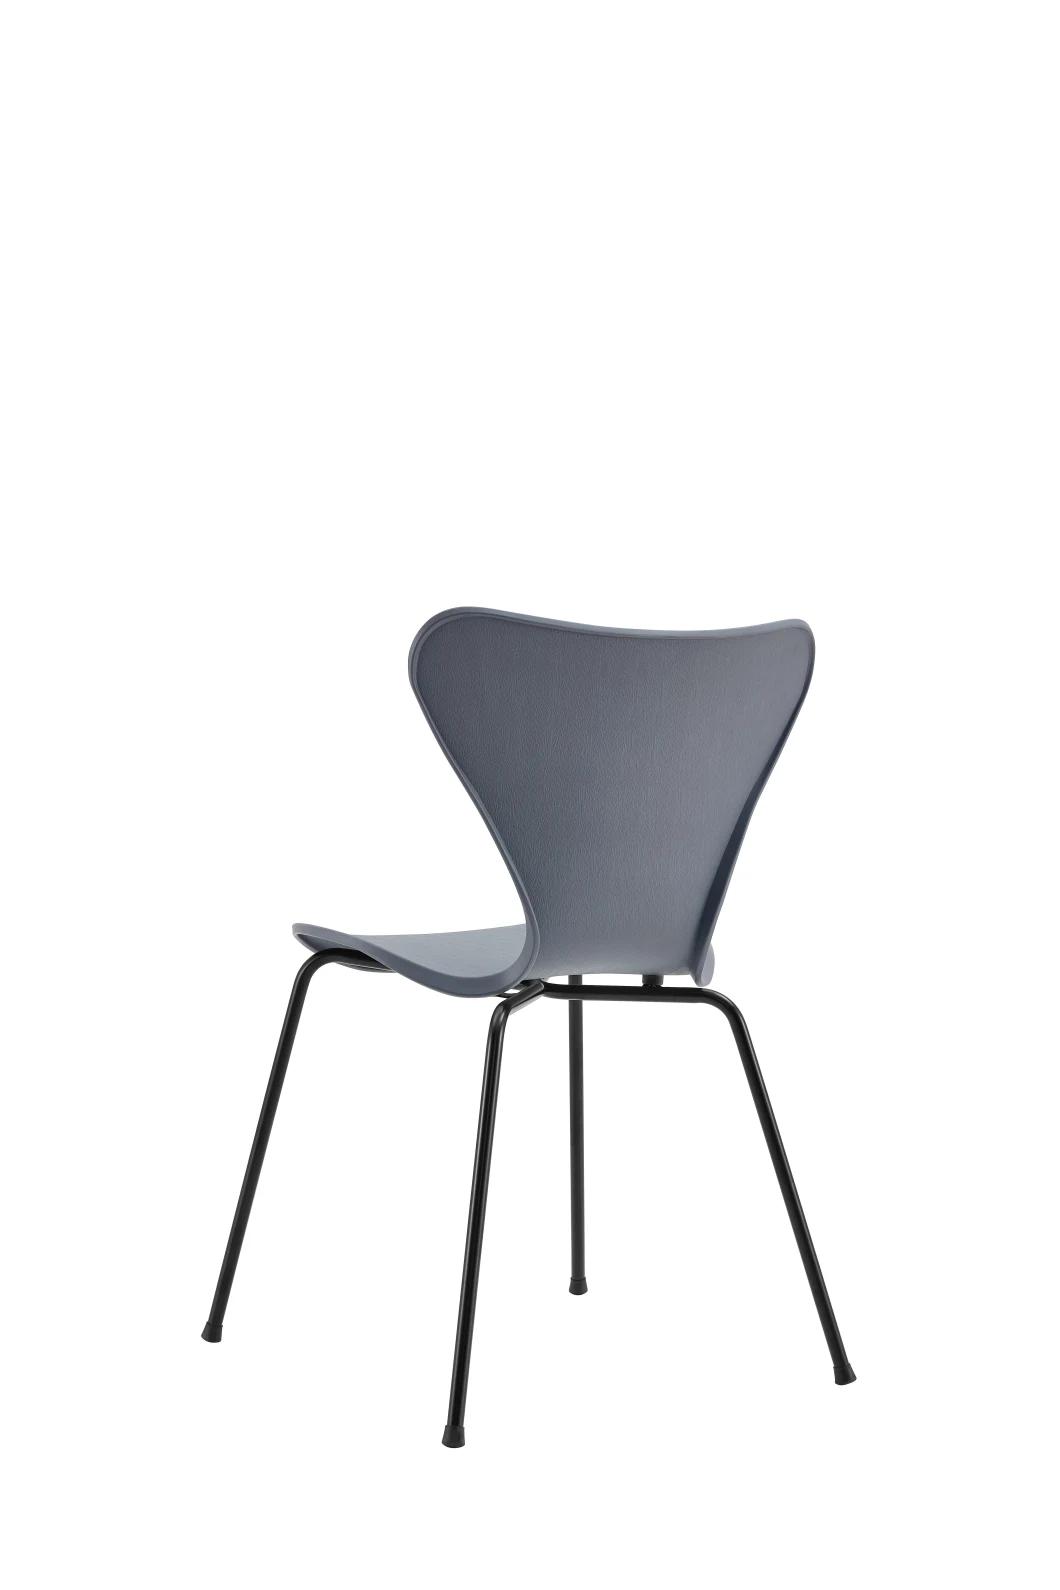 Dining Chairs Side Chair Modern Stylish PP Plastic Seat with Metal Legs MID Century Modern Chair for Living Room, Dining Room, Bedroom, Kitchen